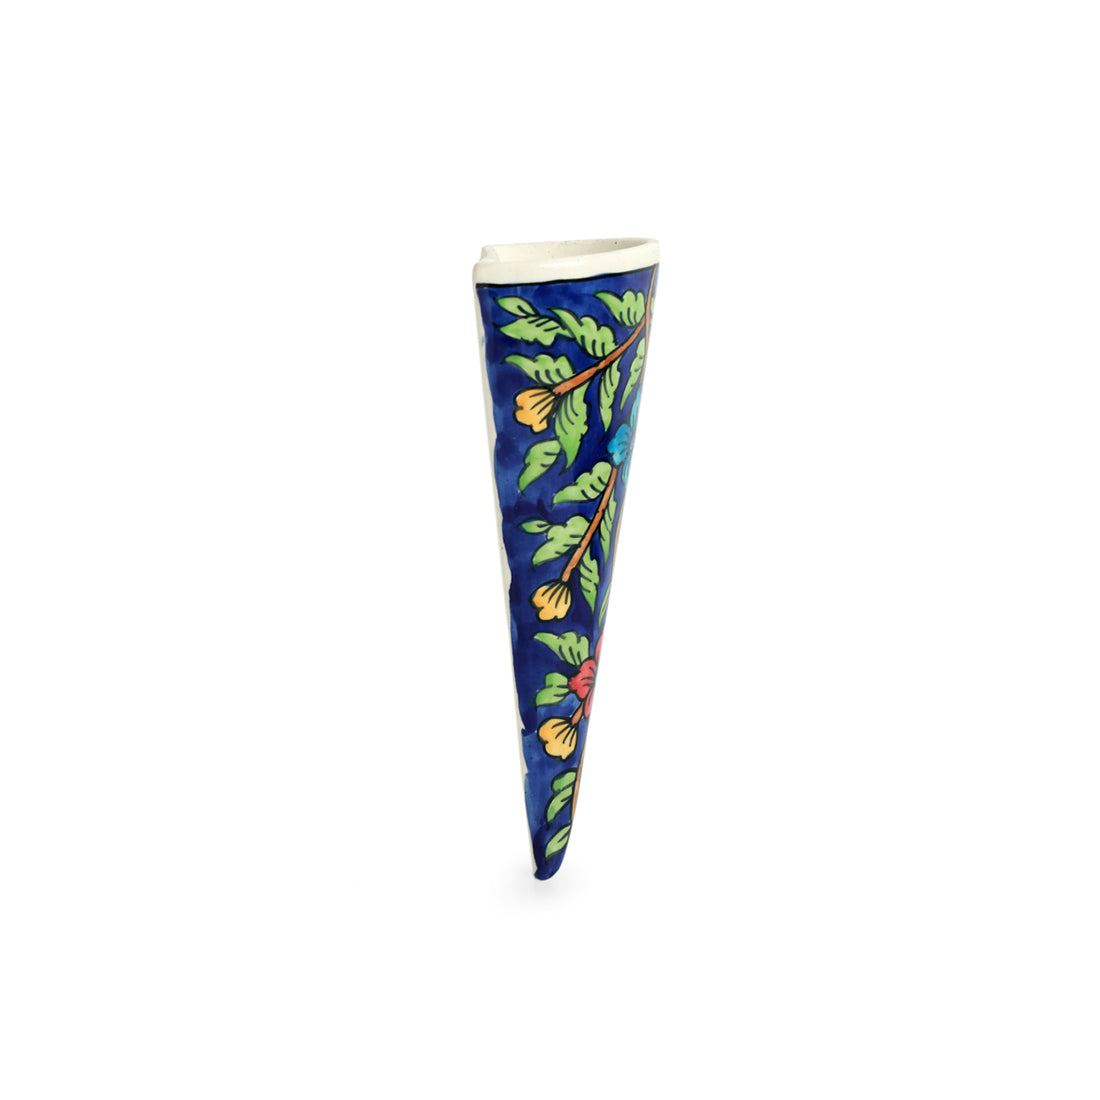 'Floral Cones' Handpainted Wall Planter Pots In Ceramic (Set of 2)